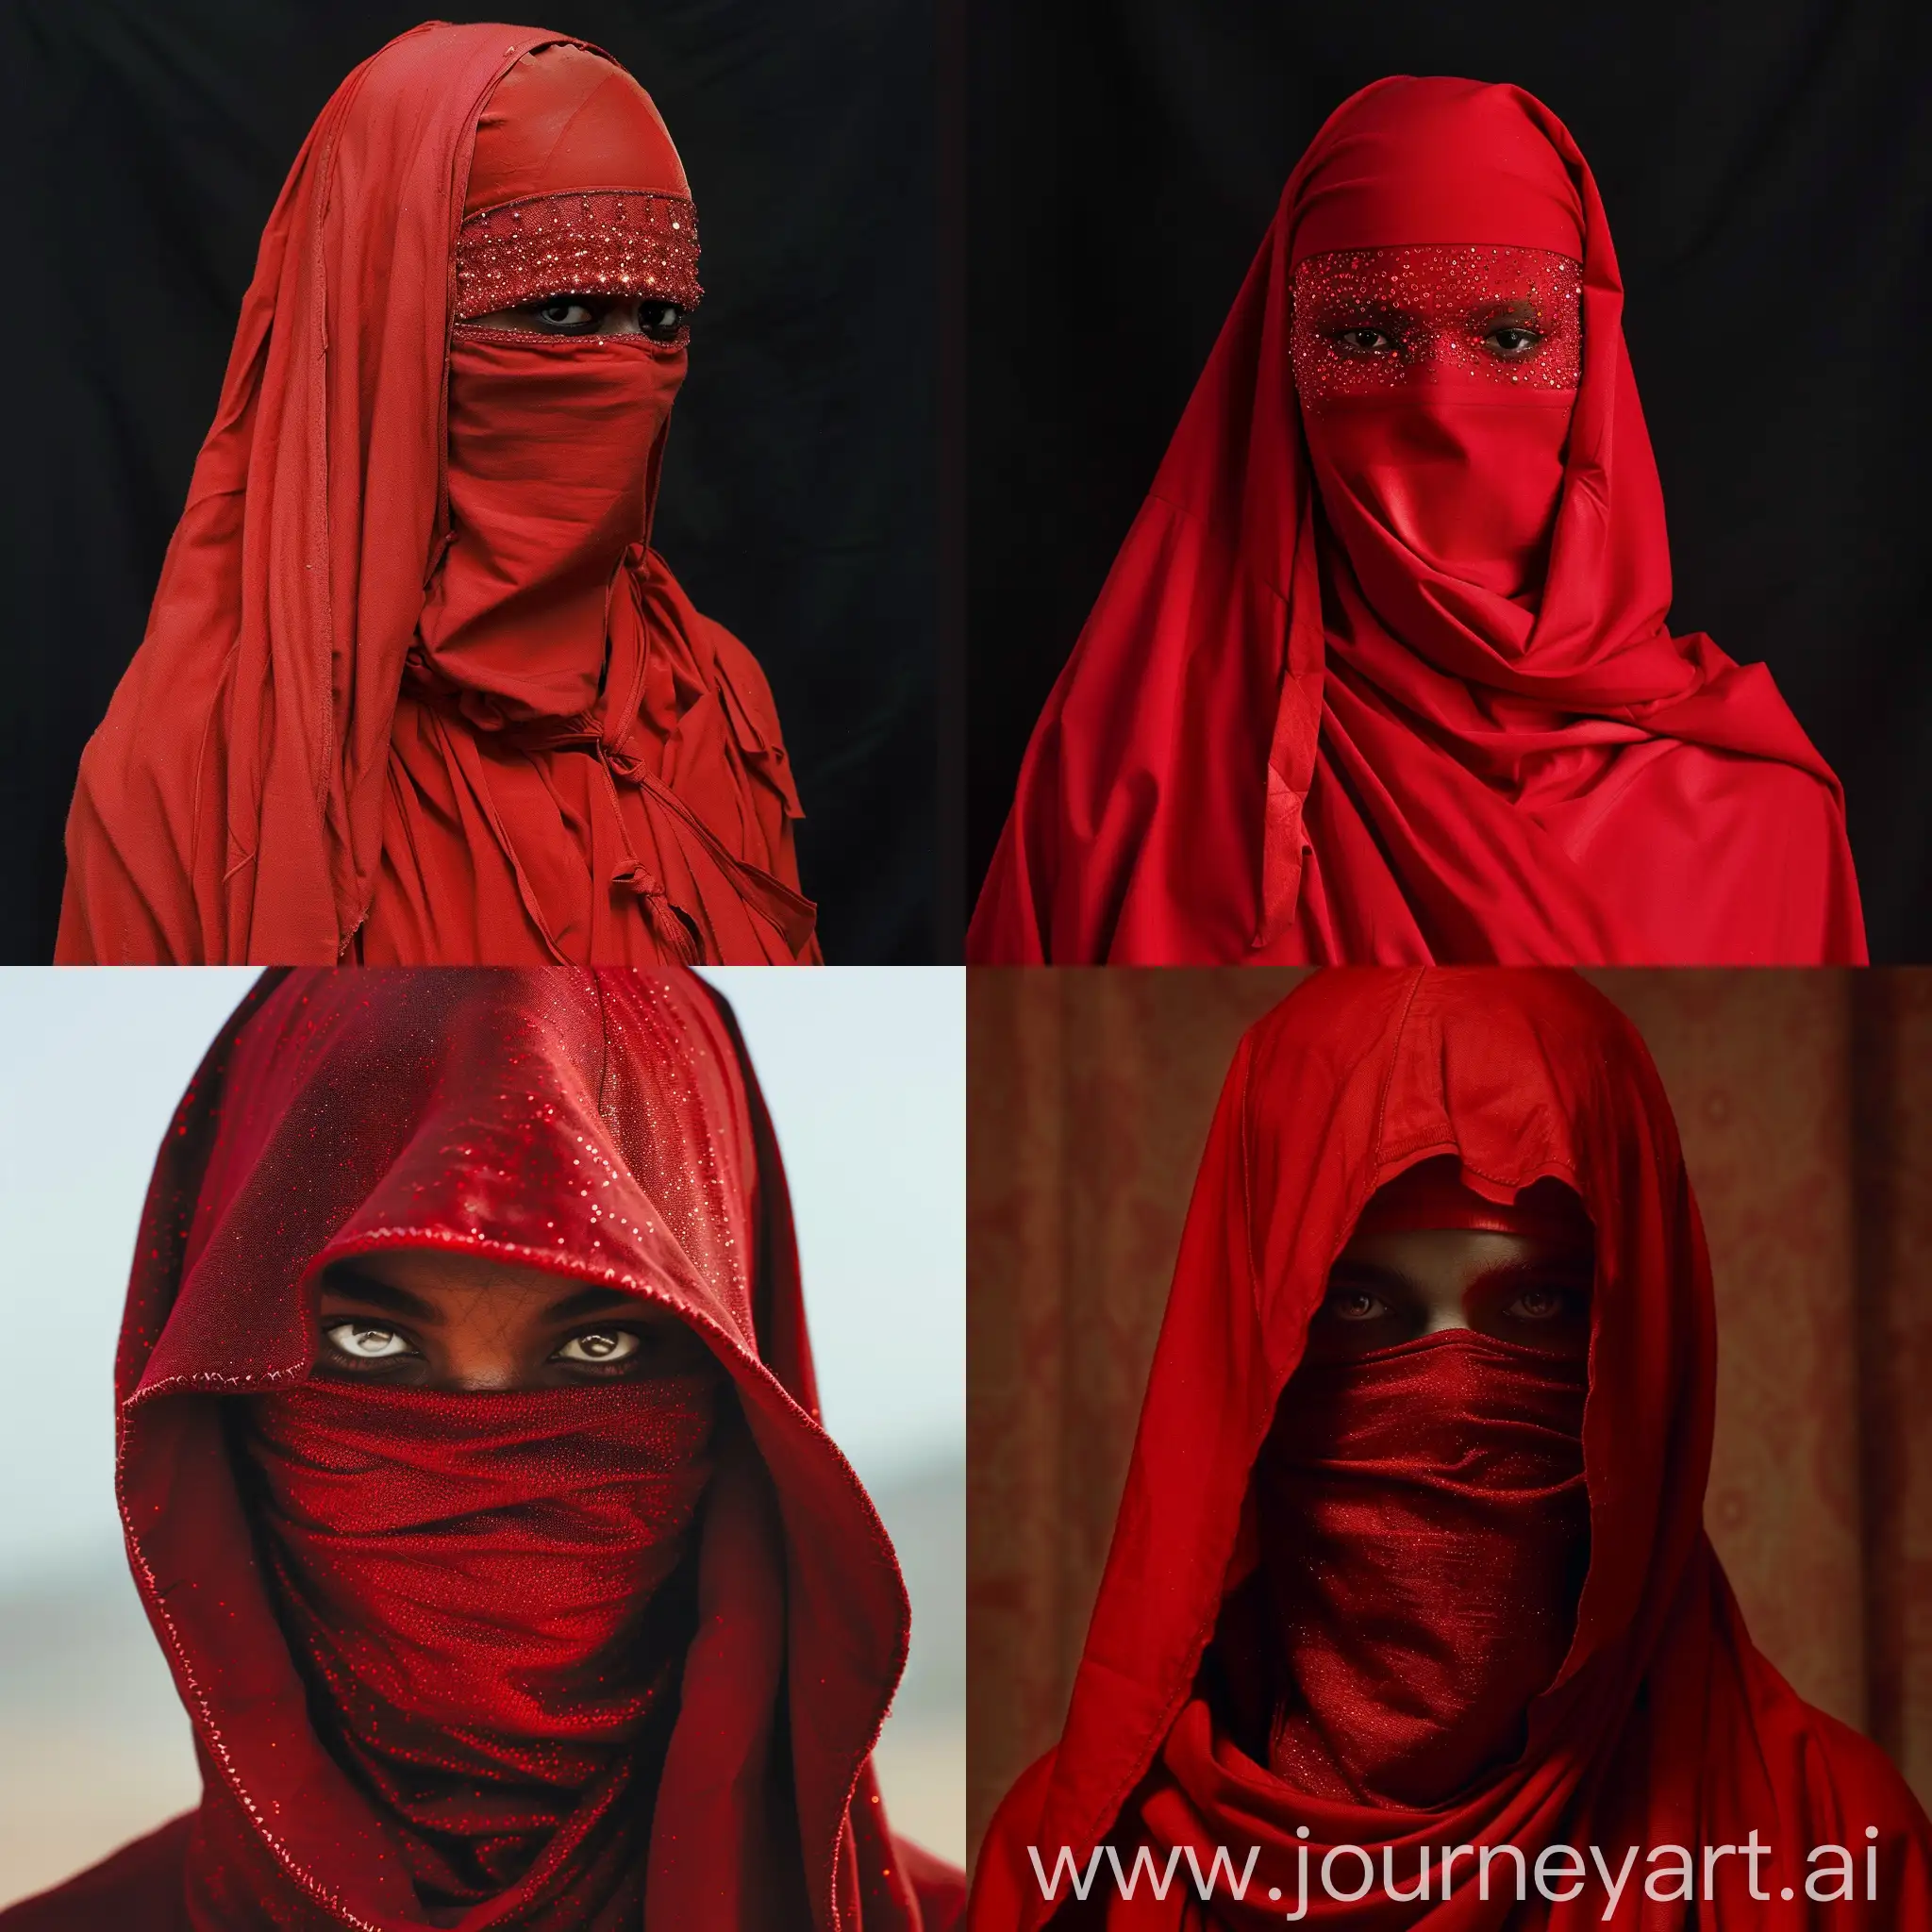 photo of a red hood with highlights, no eyes, no face covering, religious clothing, margiela, kanye style raw —v 6